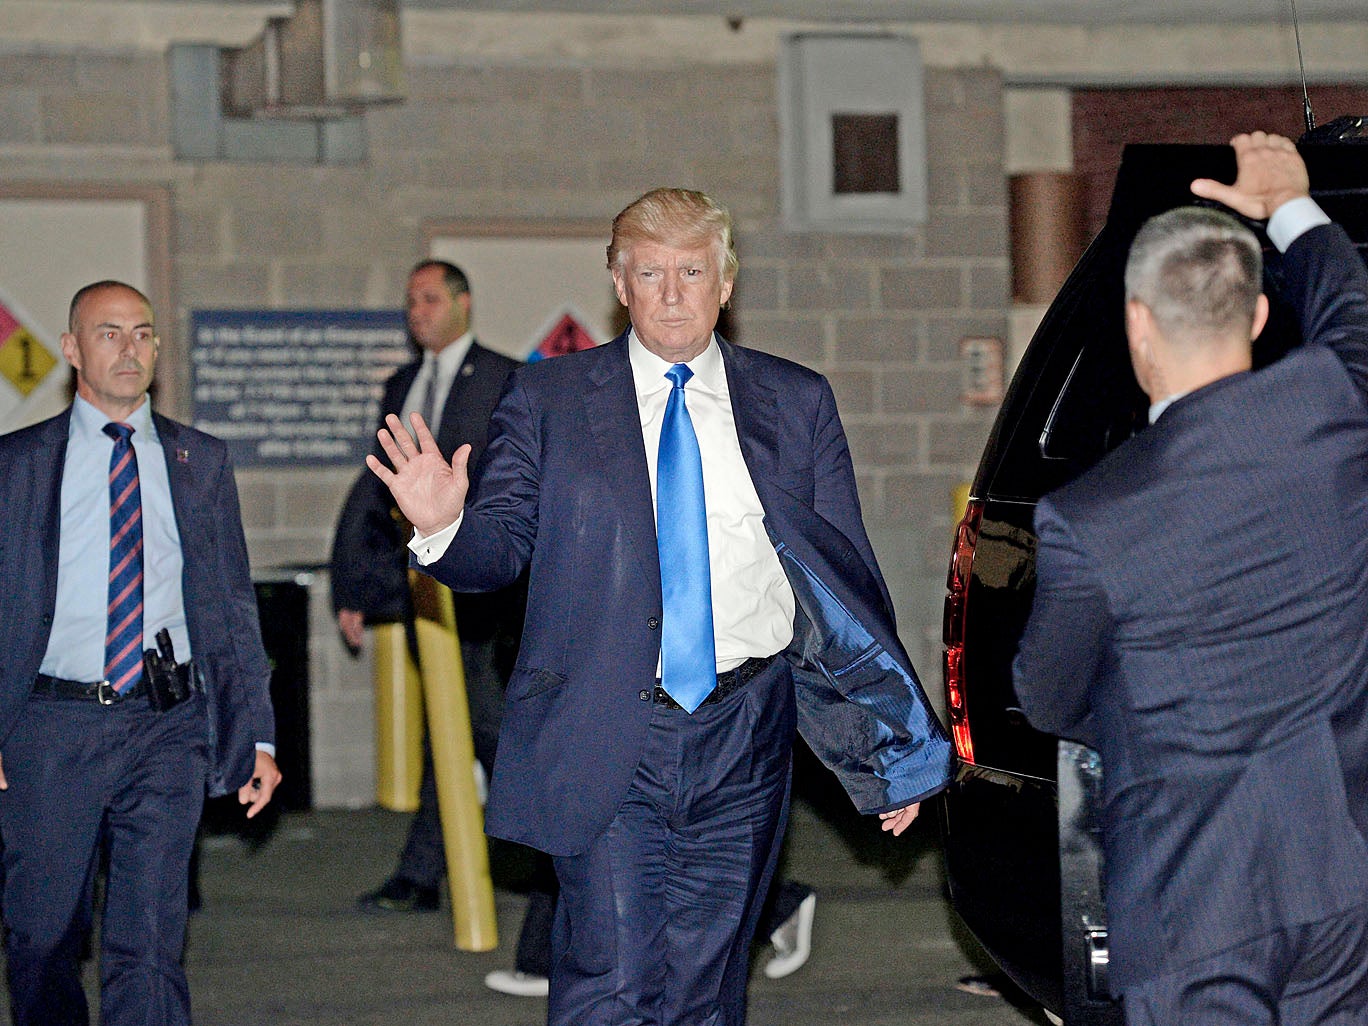 US President Donald Trump (C) and leaves the MedStar Washington Hospital Center after visiting victims of the shooting at a baseball practice session